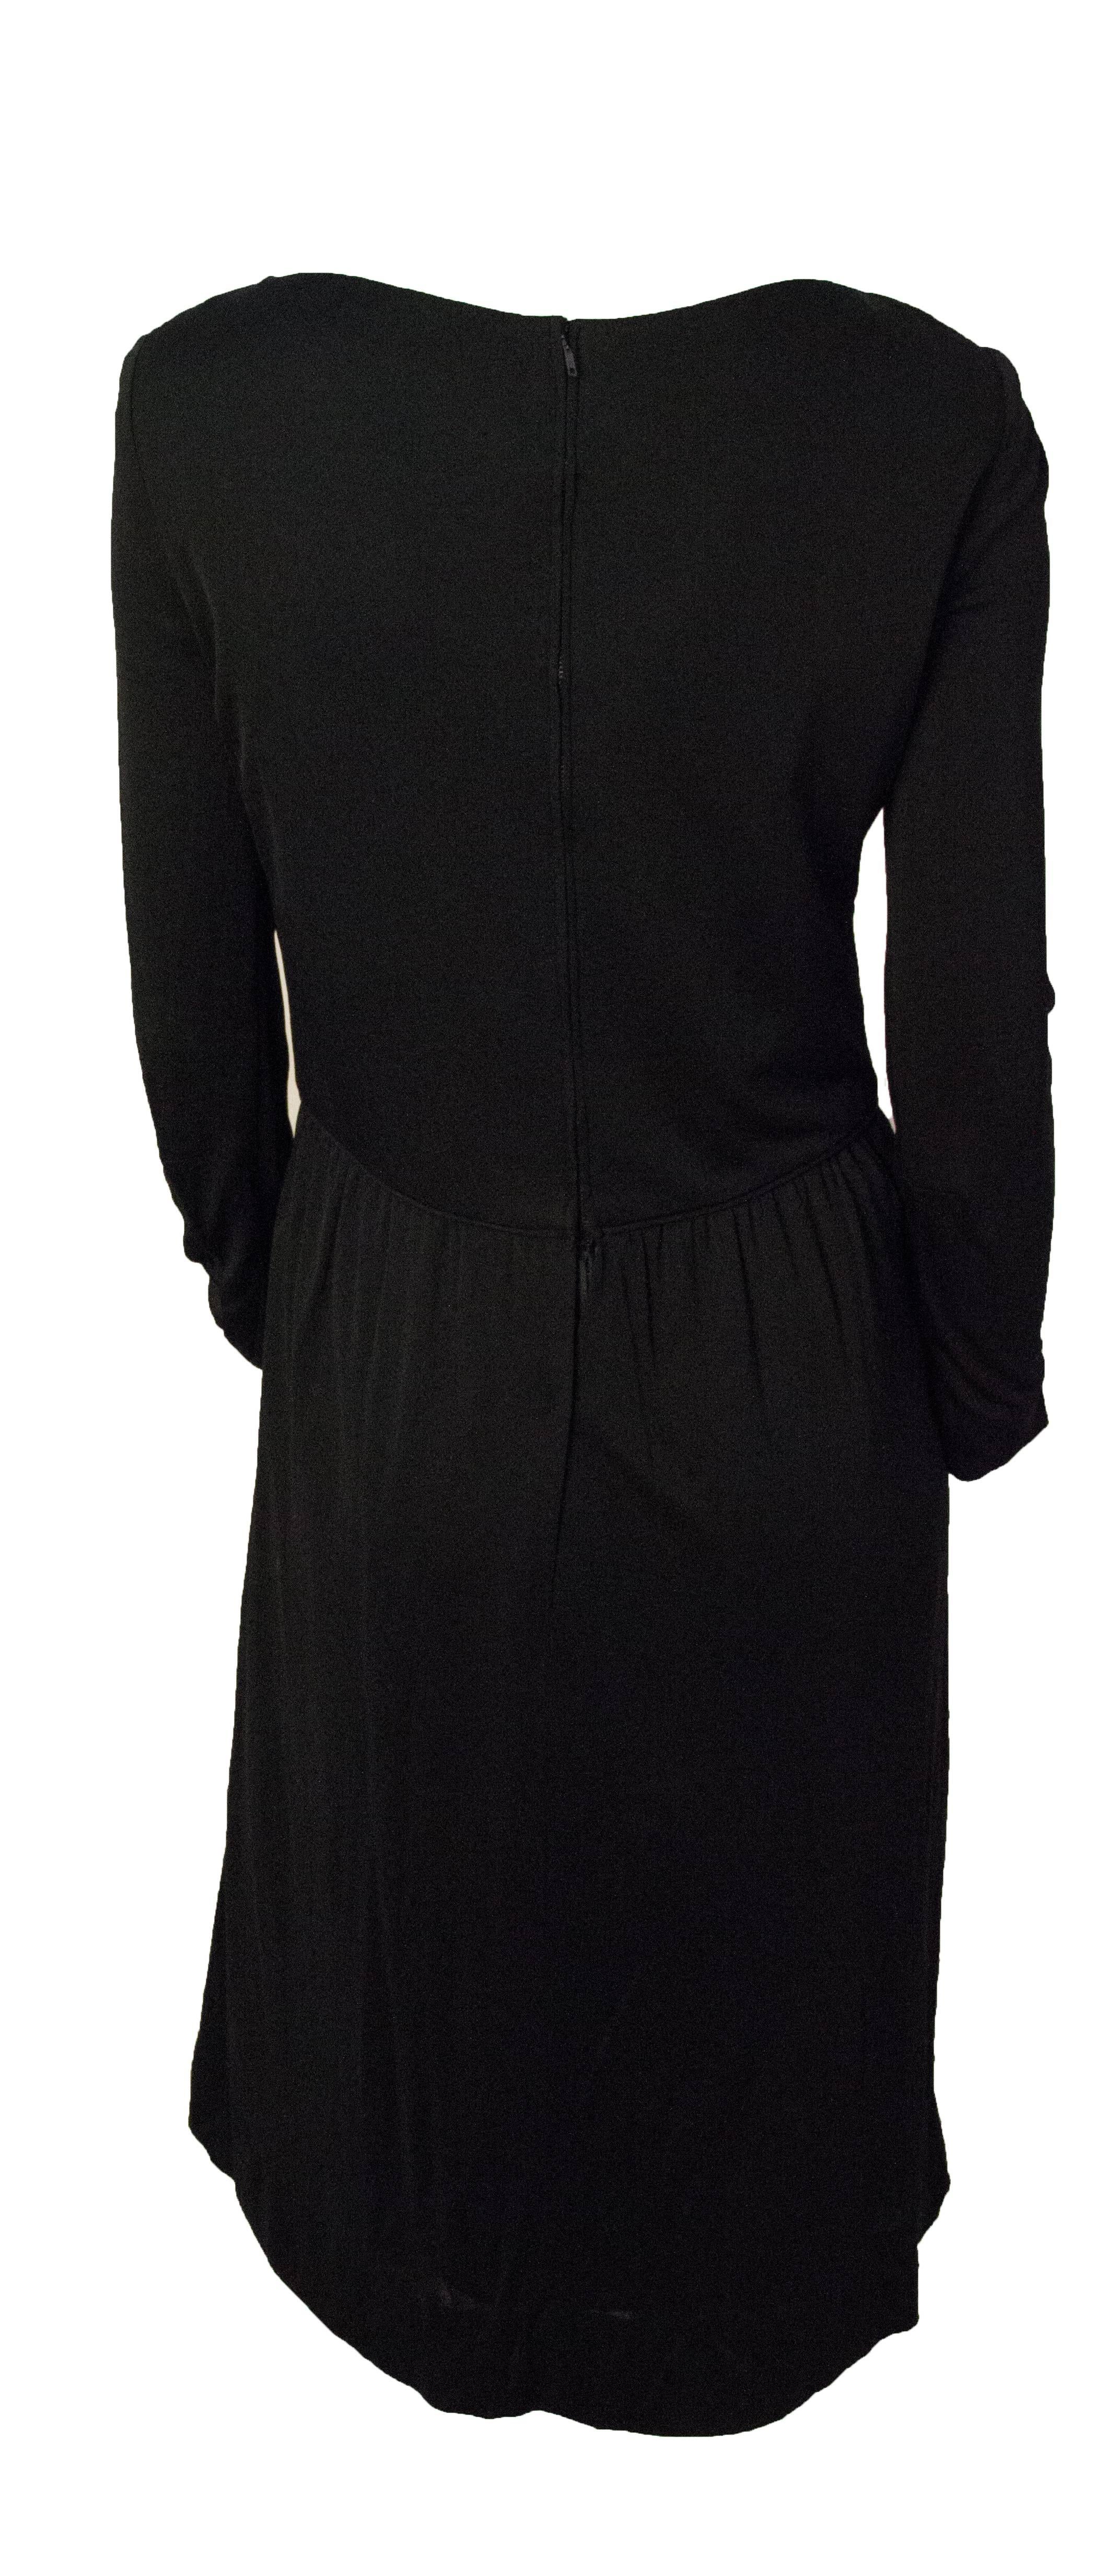 70s Ceil Chapman black silk jersey dress. Lace up front. Rhinestone encrusted grommets and end pieces on lace. Metal zip up the back. Fully lined. 